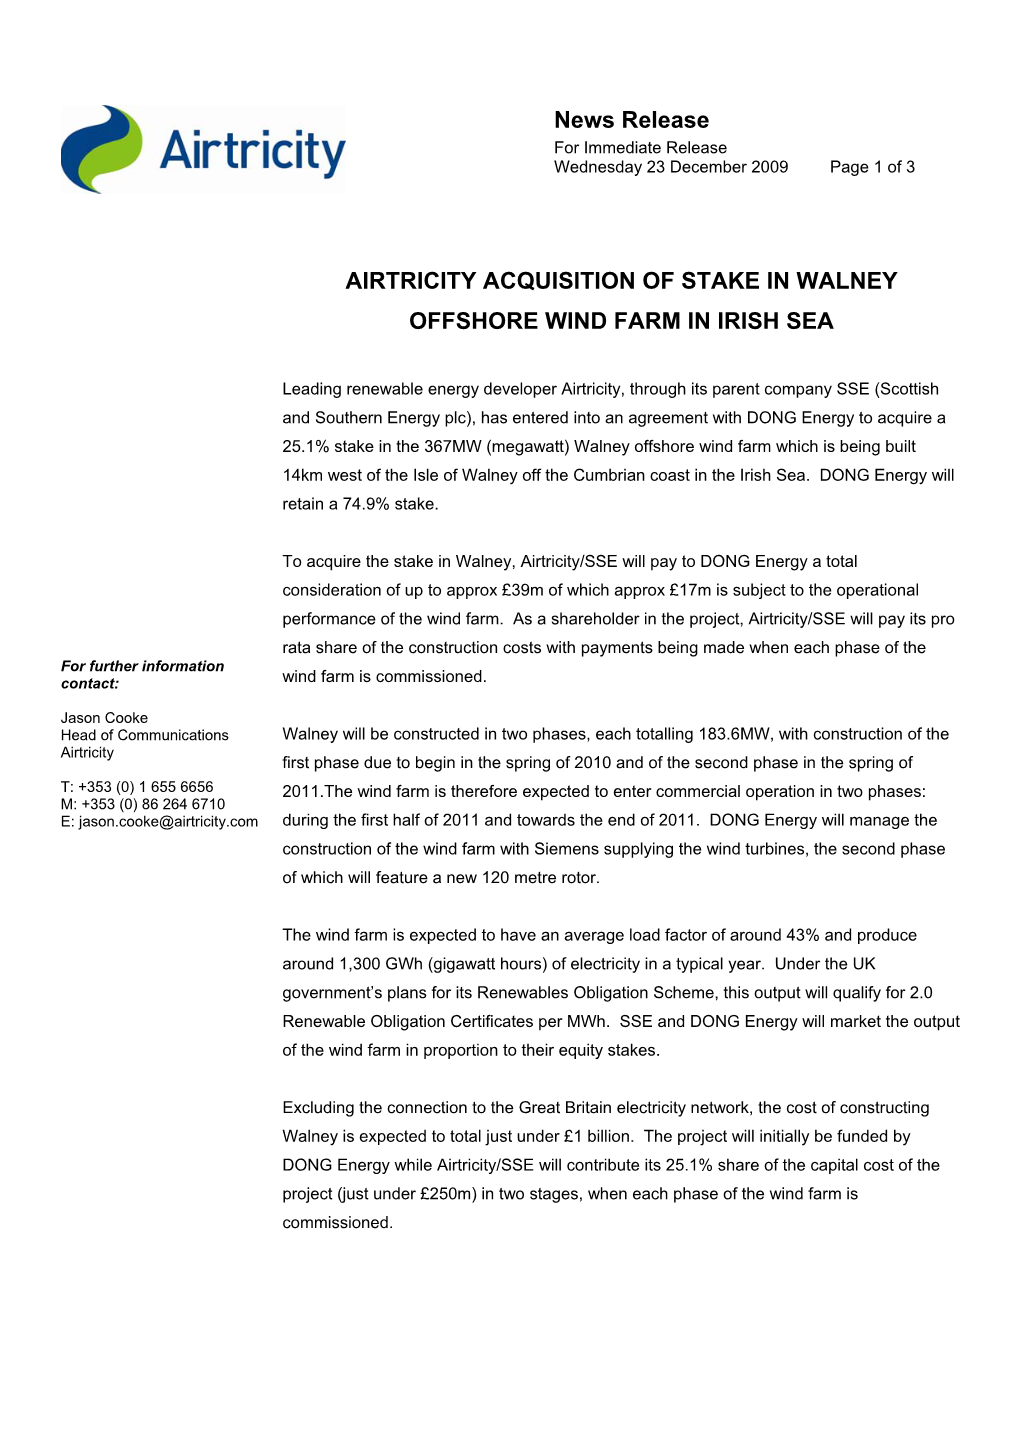 Airtricity Acquisition of Stake in Walney Offshore Wind Farm in Irish Sea